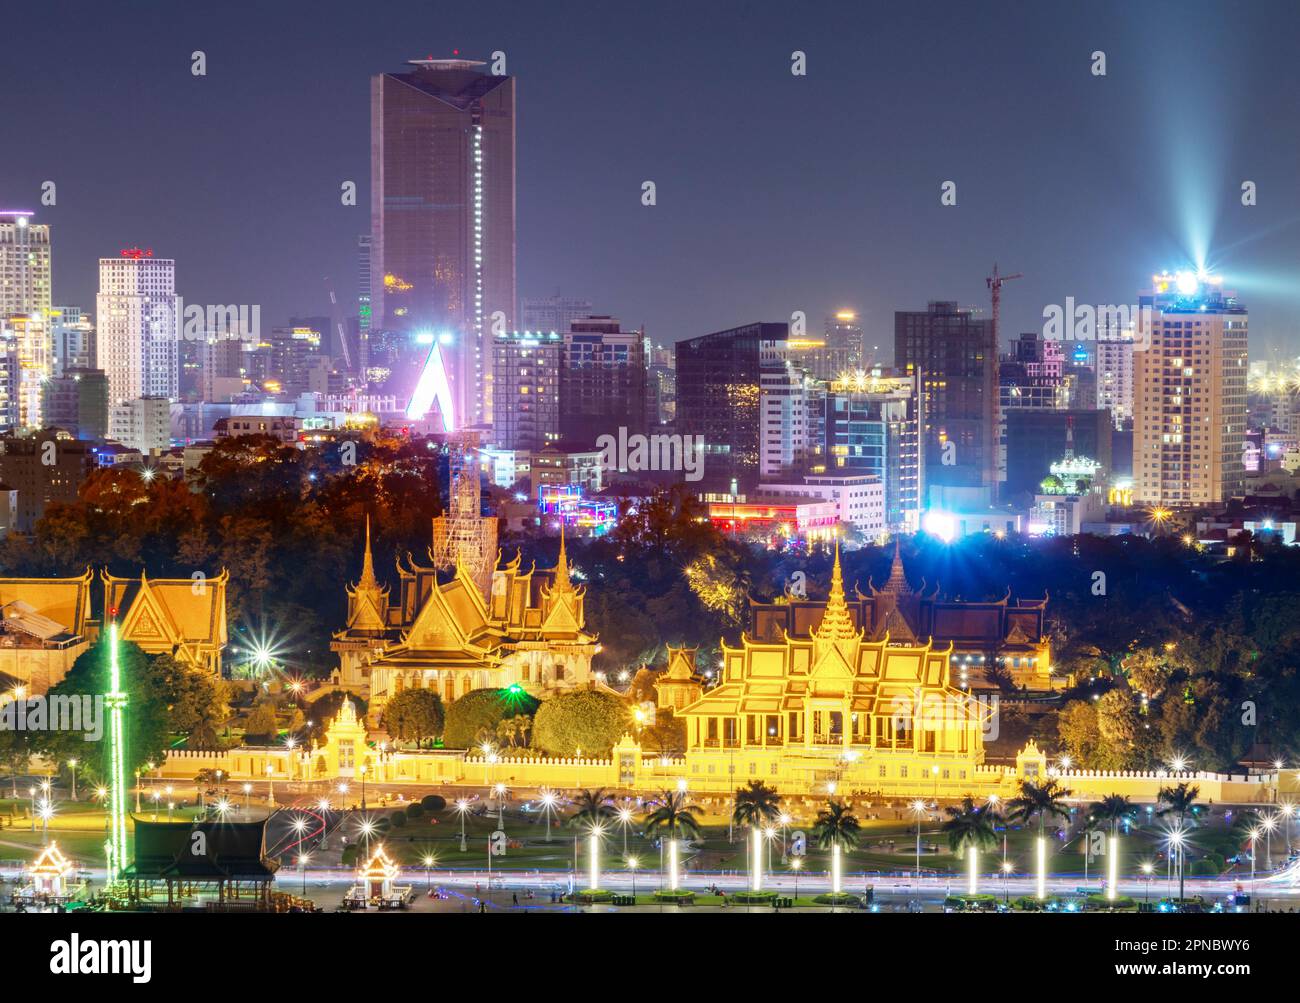 Iluminated Palace,buildings and landmarks of Cambodia's capital city,it's busy Riverside,streaks of traffic headlights,palm tree lined boulevard, and Stock Photo